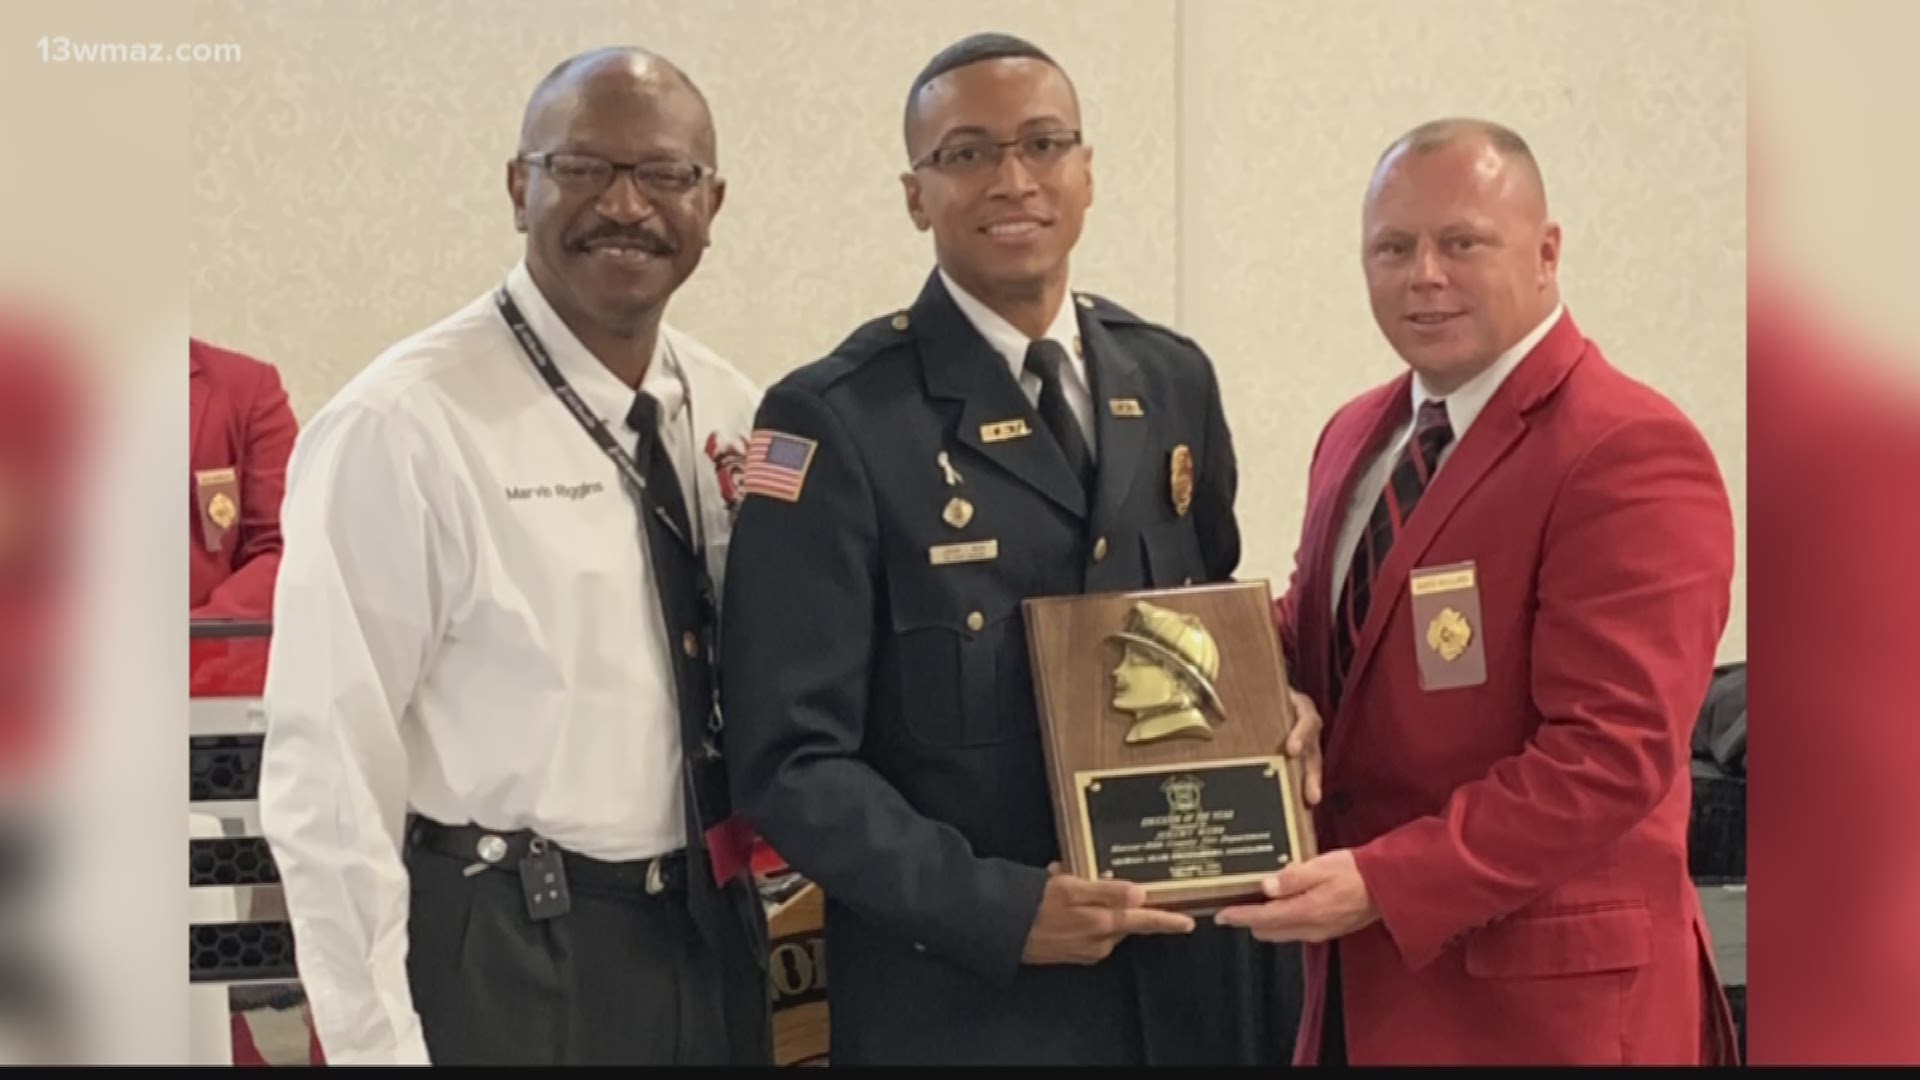 This weekend, Macon Bibb county fire educator, Jeremy Webb, received a very special award. He is now the 2019 fire educator of the year!